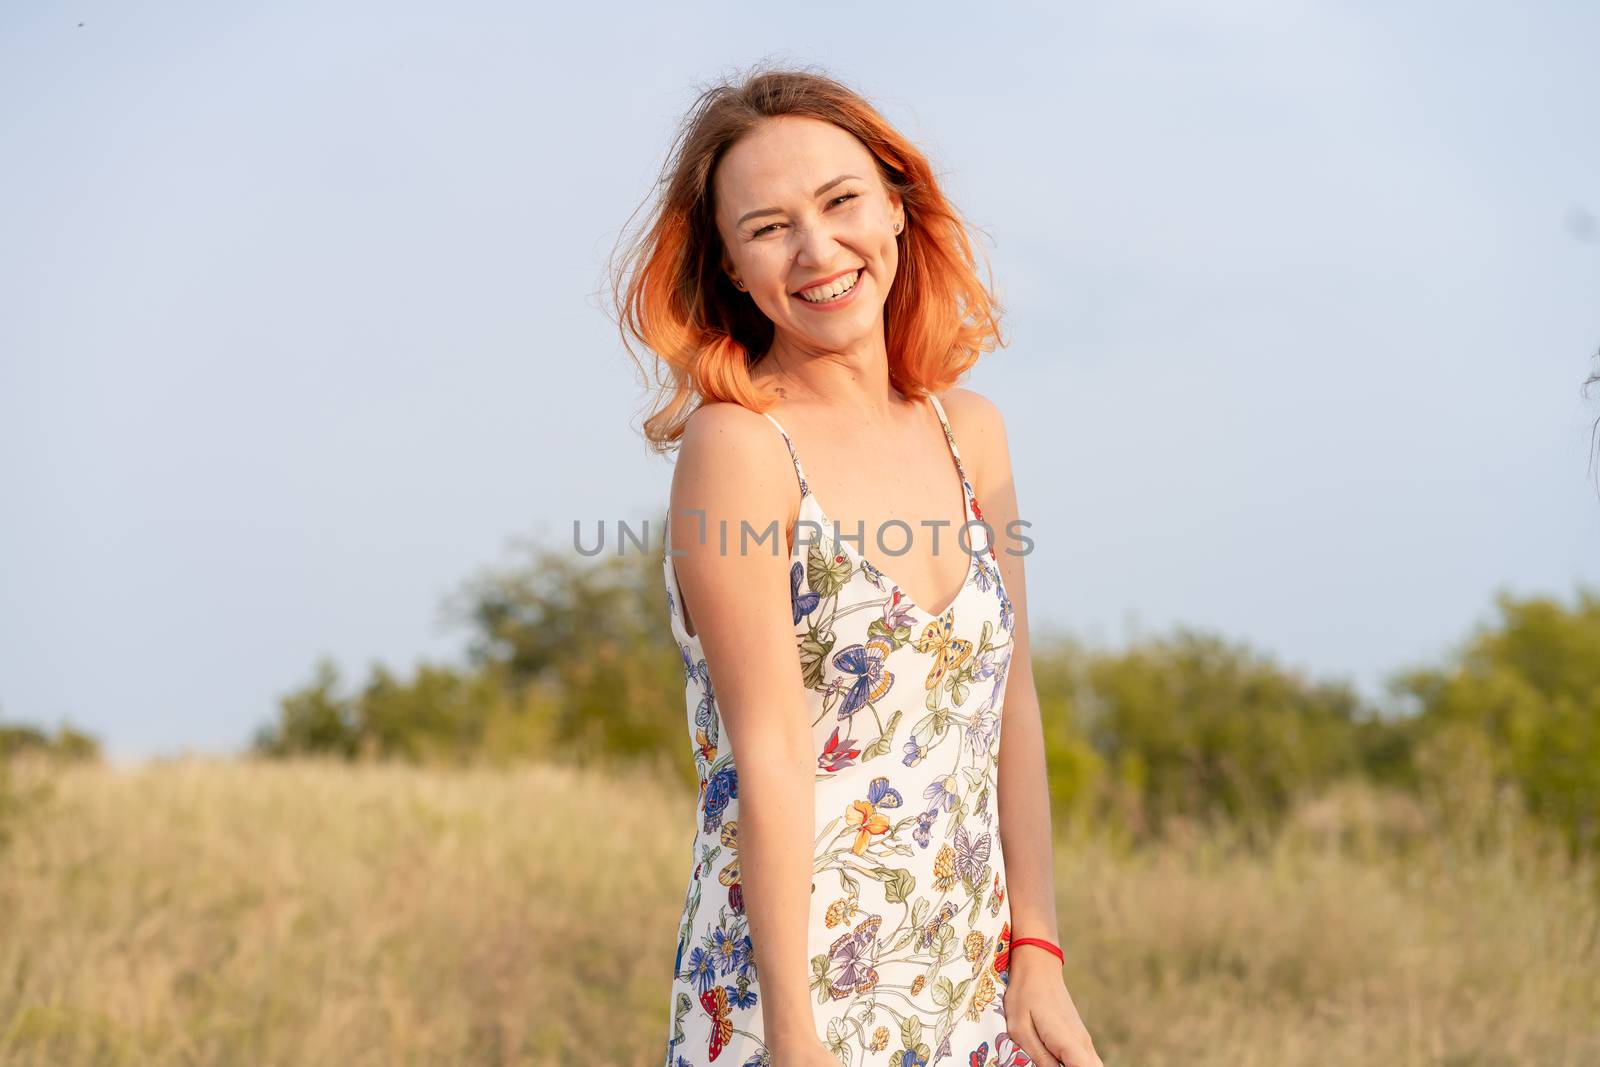 Beautiful red-haired girl is having fun and dancing in a field at sunset.